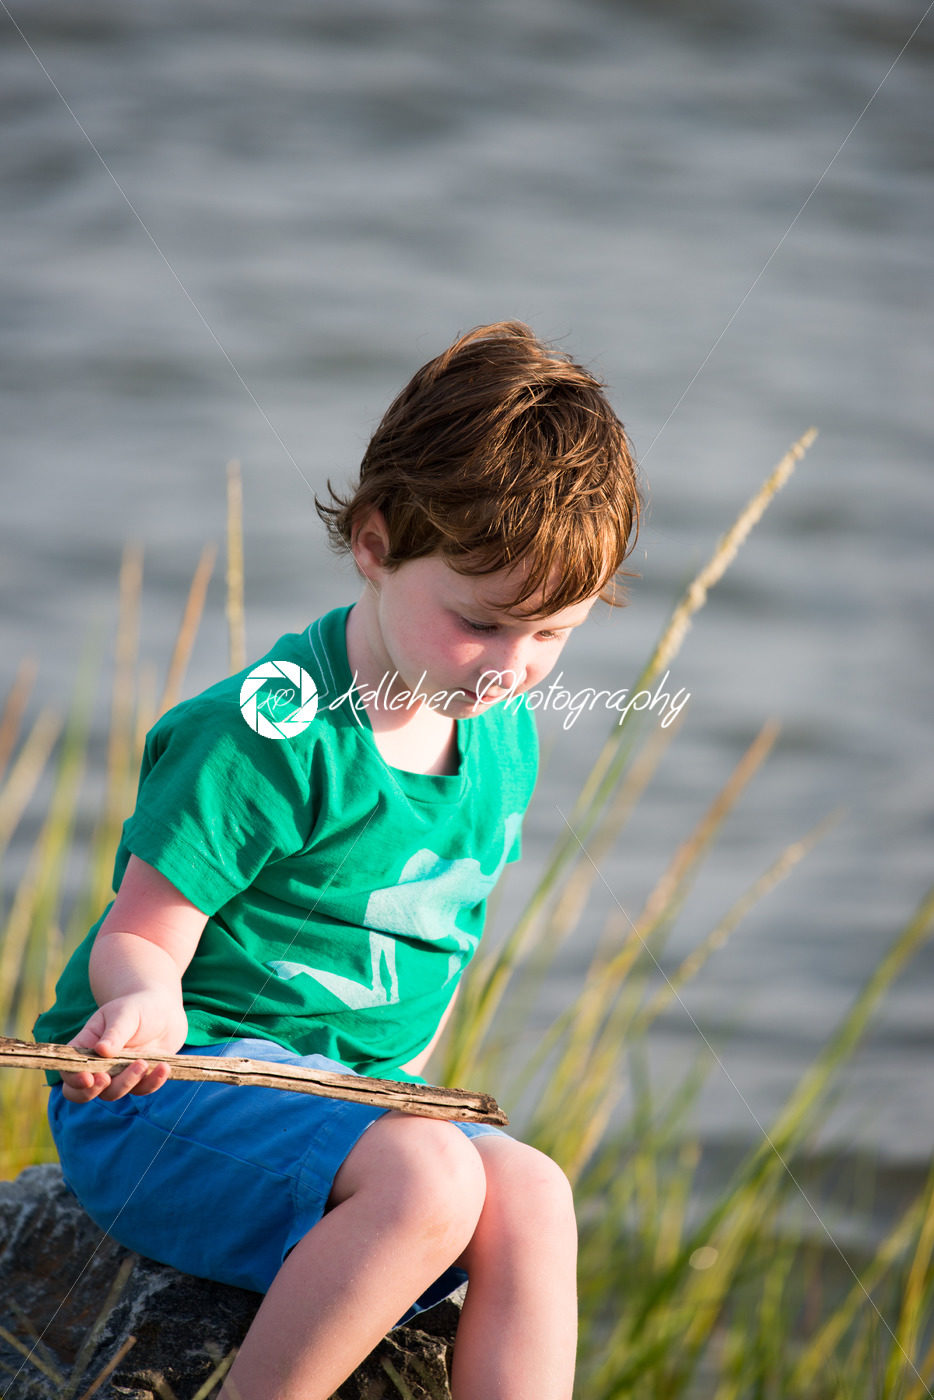 Young boy holding stick from among the reeds along the bay - Kelleher Photography Store